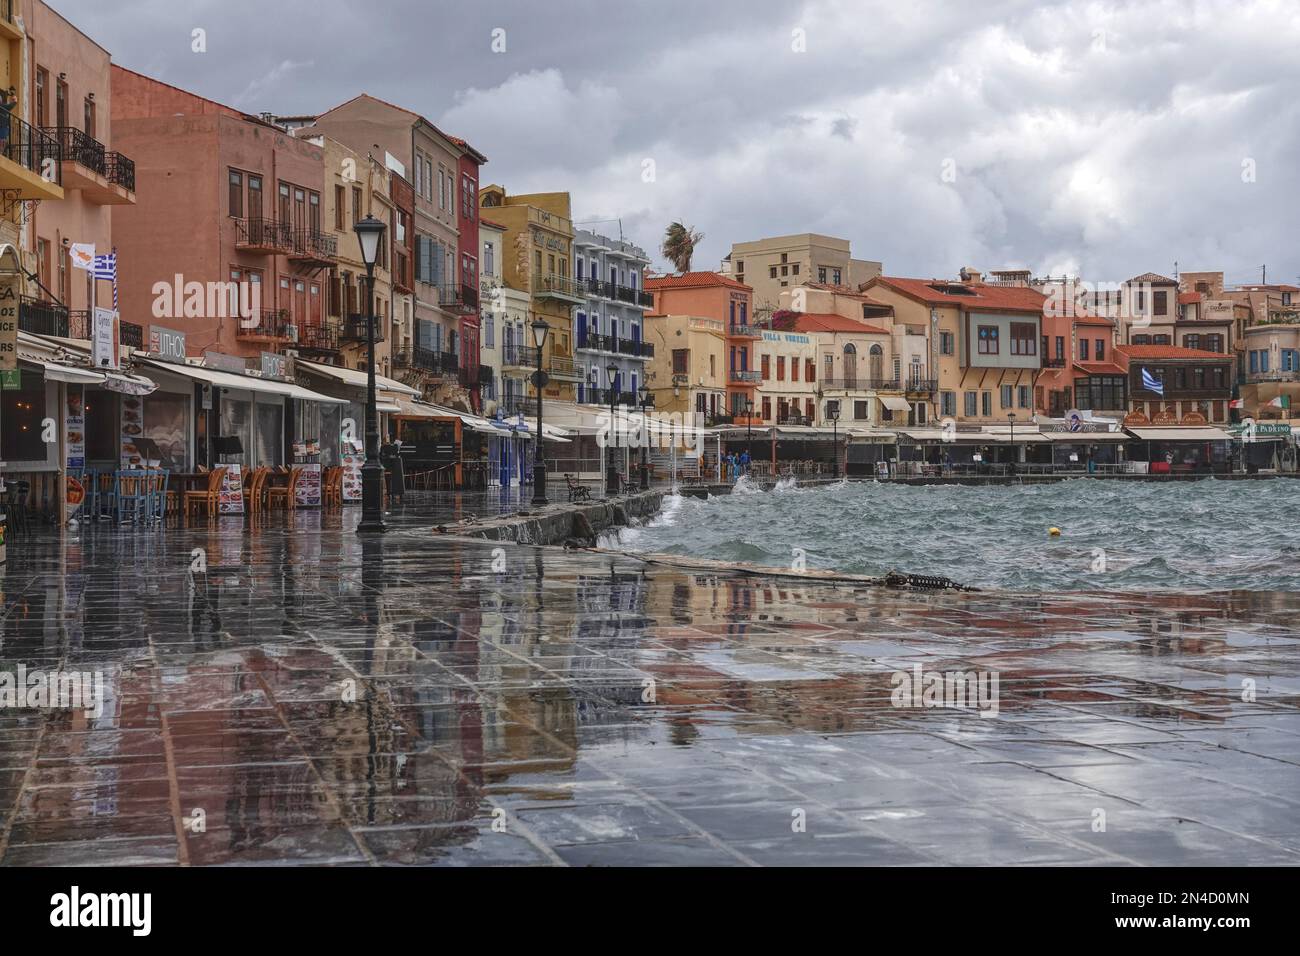 The Venetian harbour of Chania old town in Crete, Greece, after a heavy storm Stock Photo